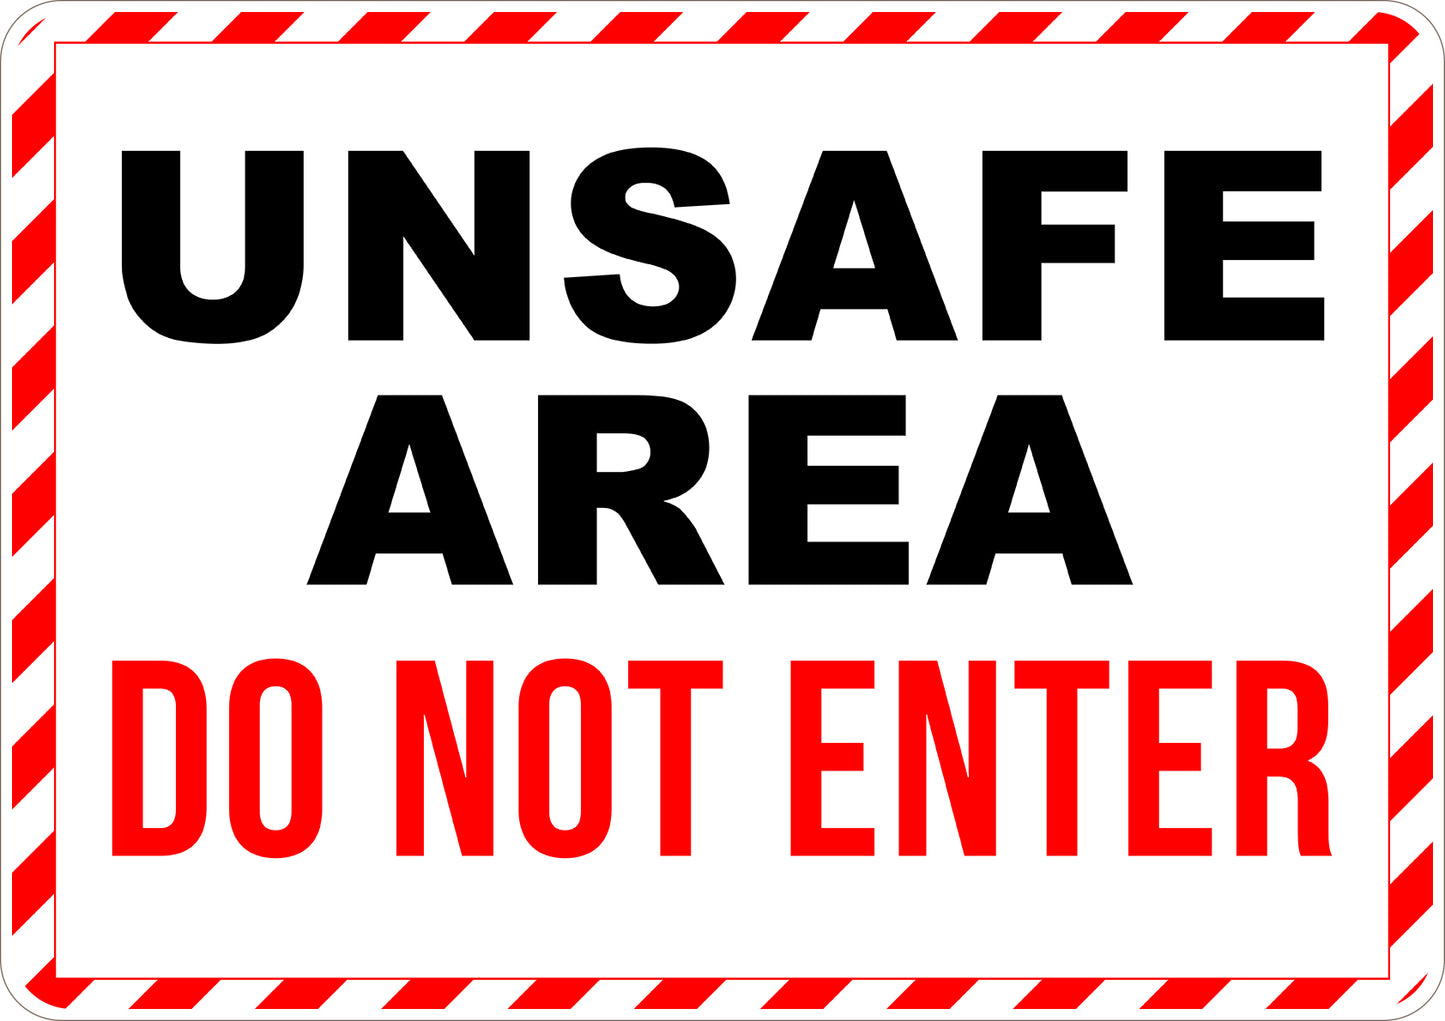 Unsafe Area Do Not Enter Printed Sign